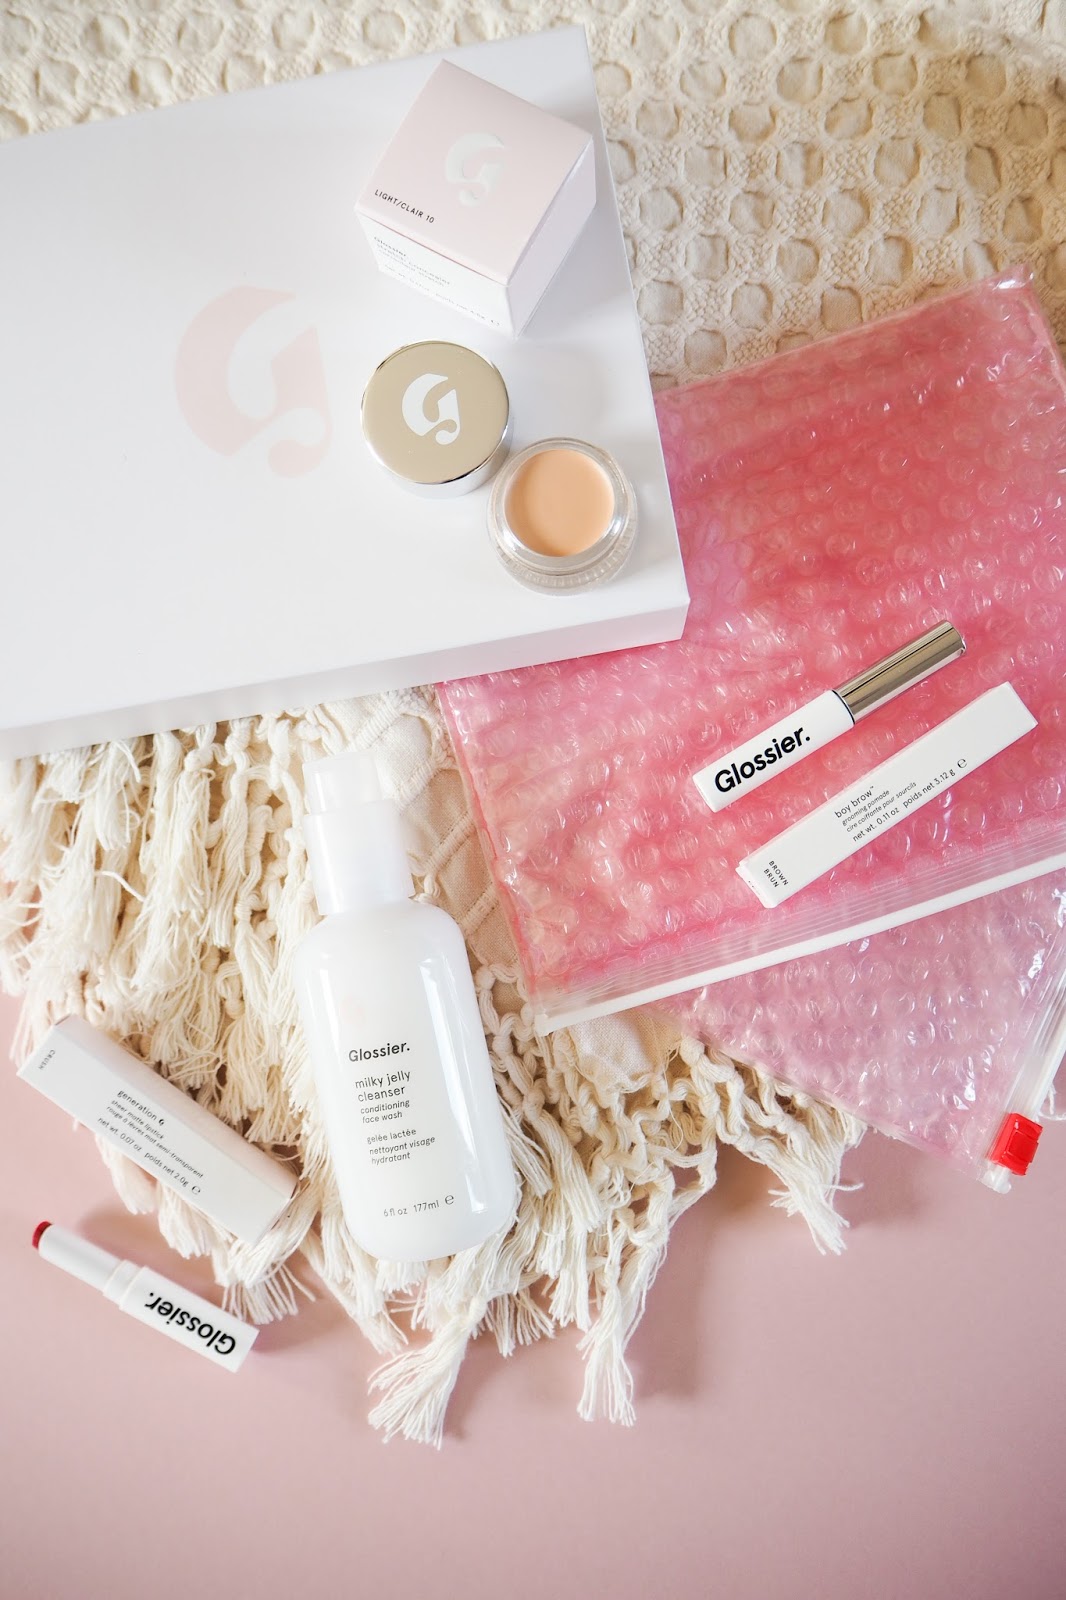 My UK Glossier Buying Experience and Haul